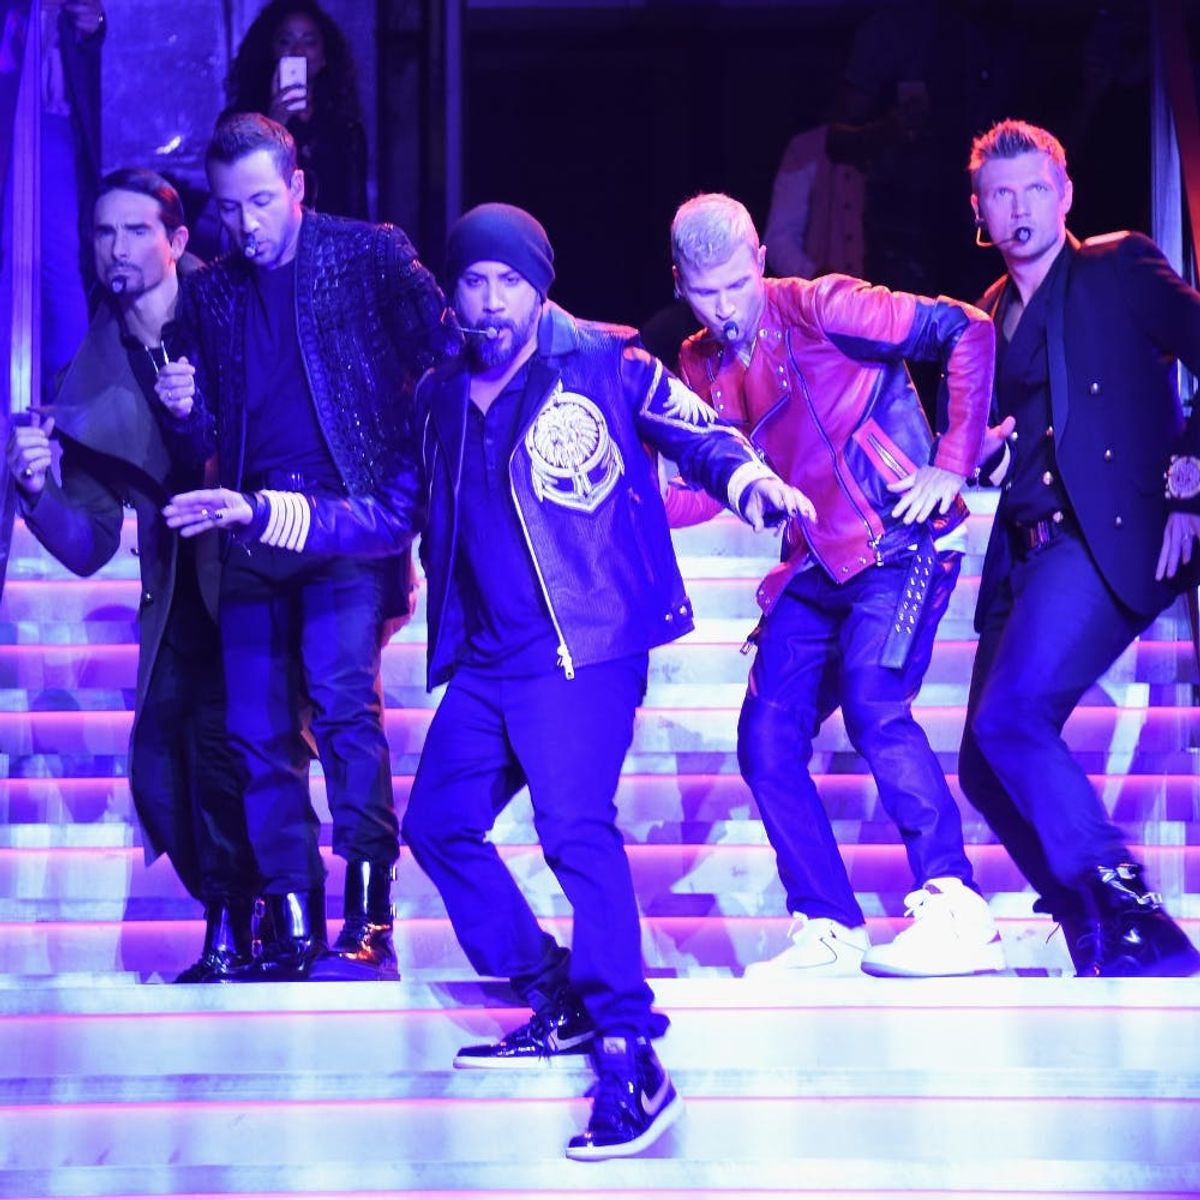 The Backstreet Boys Surprise ACMA Performance Got the BEST Reaction from Tim McGraw